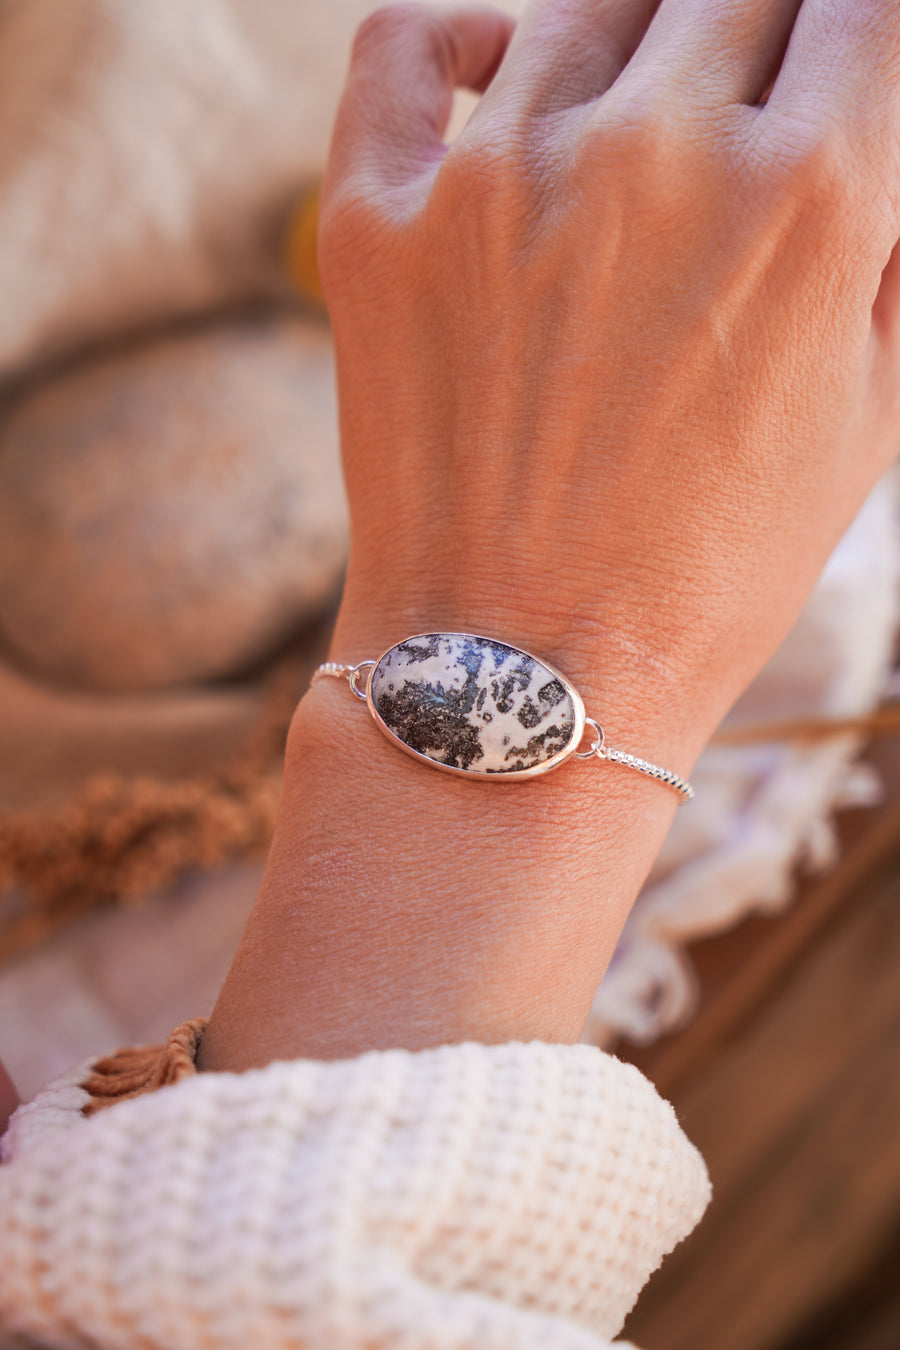 The Out West Bracelet in Dendritic Agate